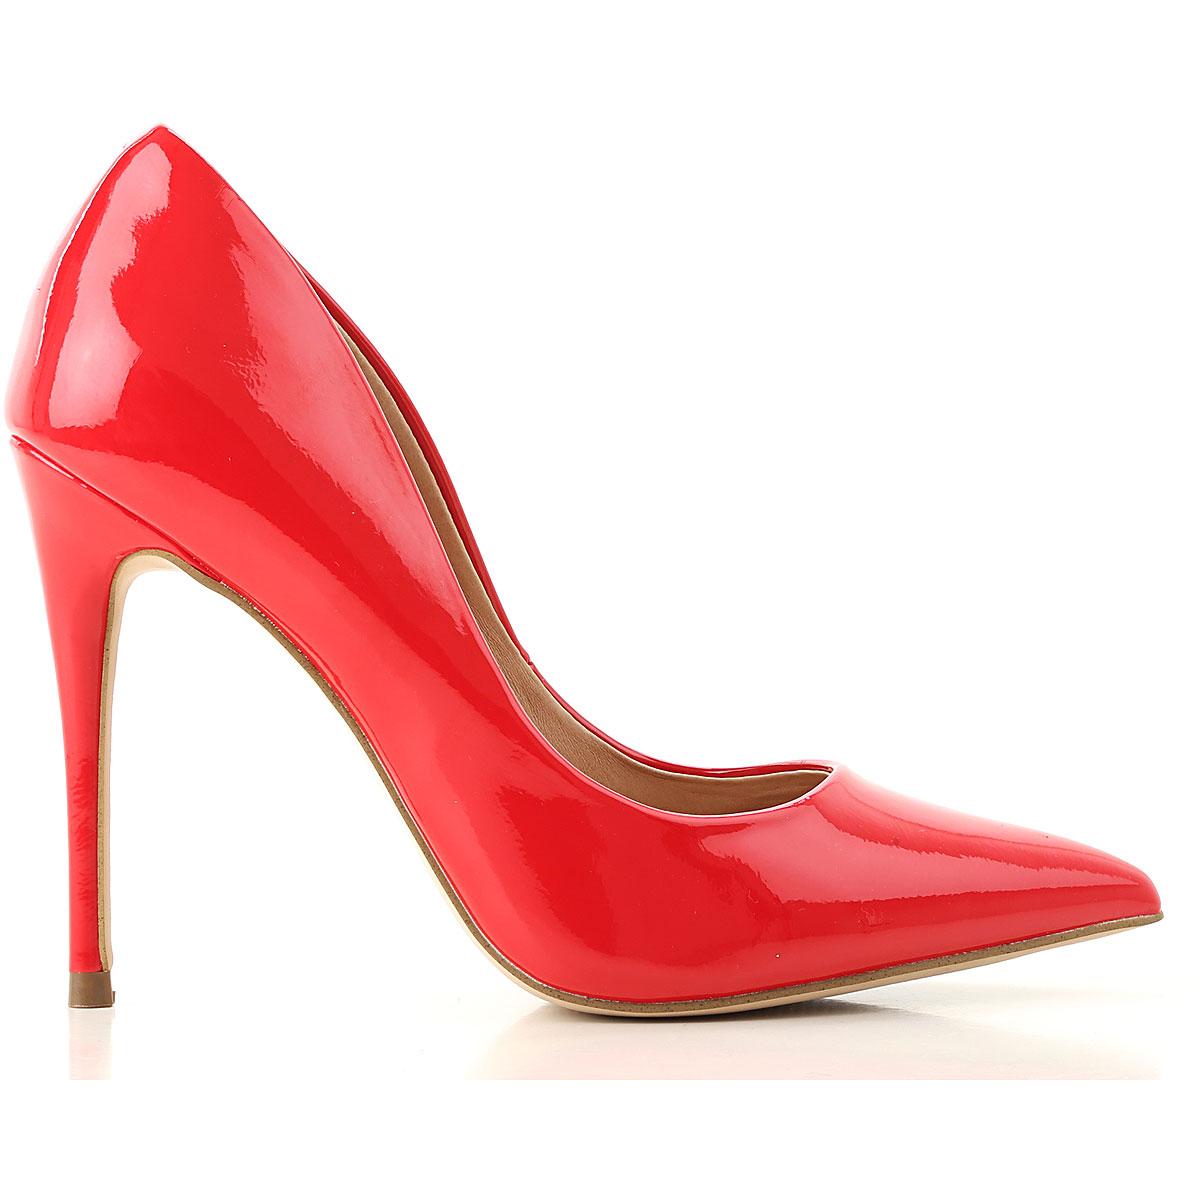 Steve Madden Pumps & High Heels For Women On Sale In Outlet in Red - Lyst